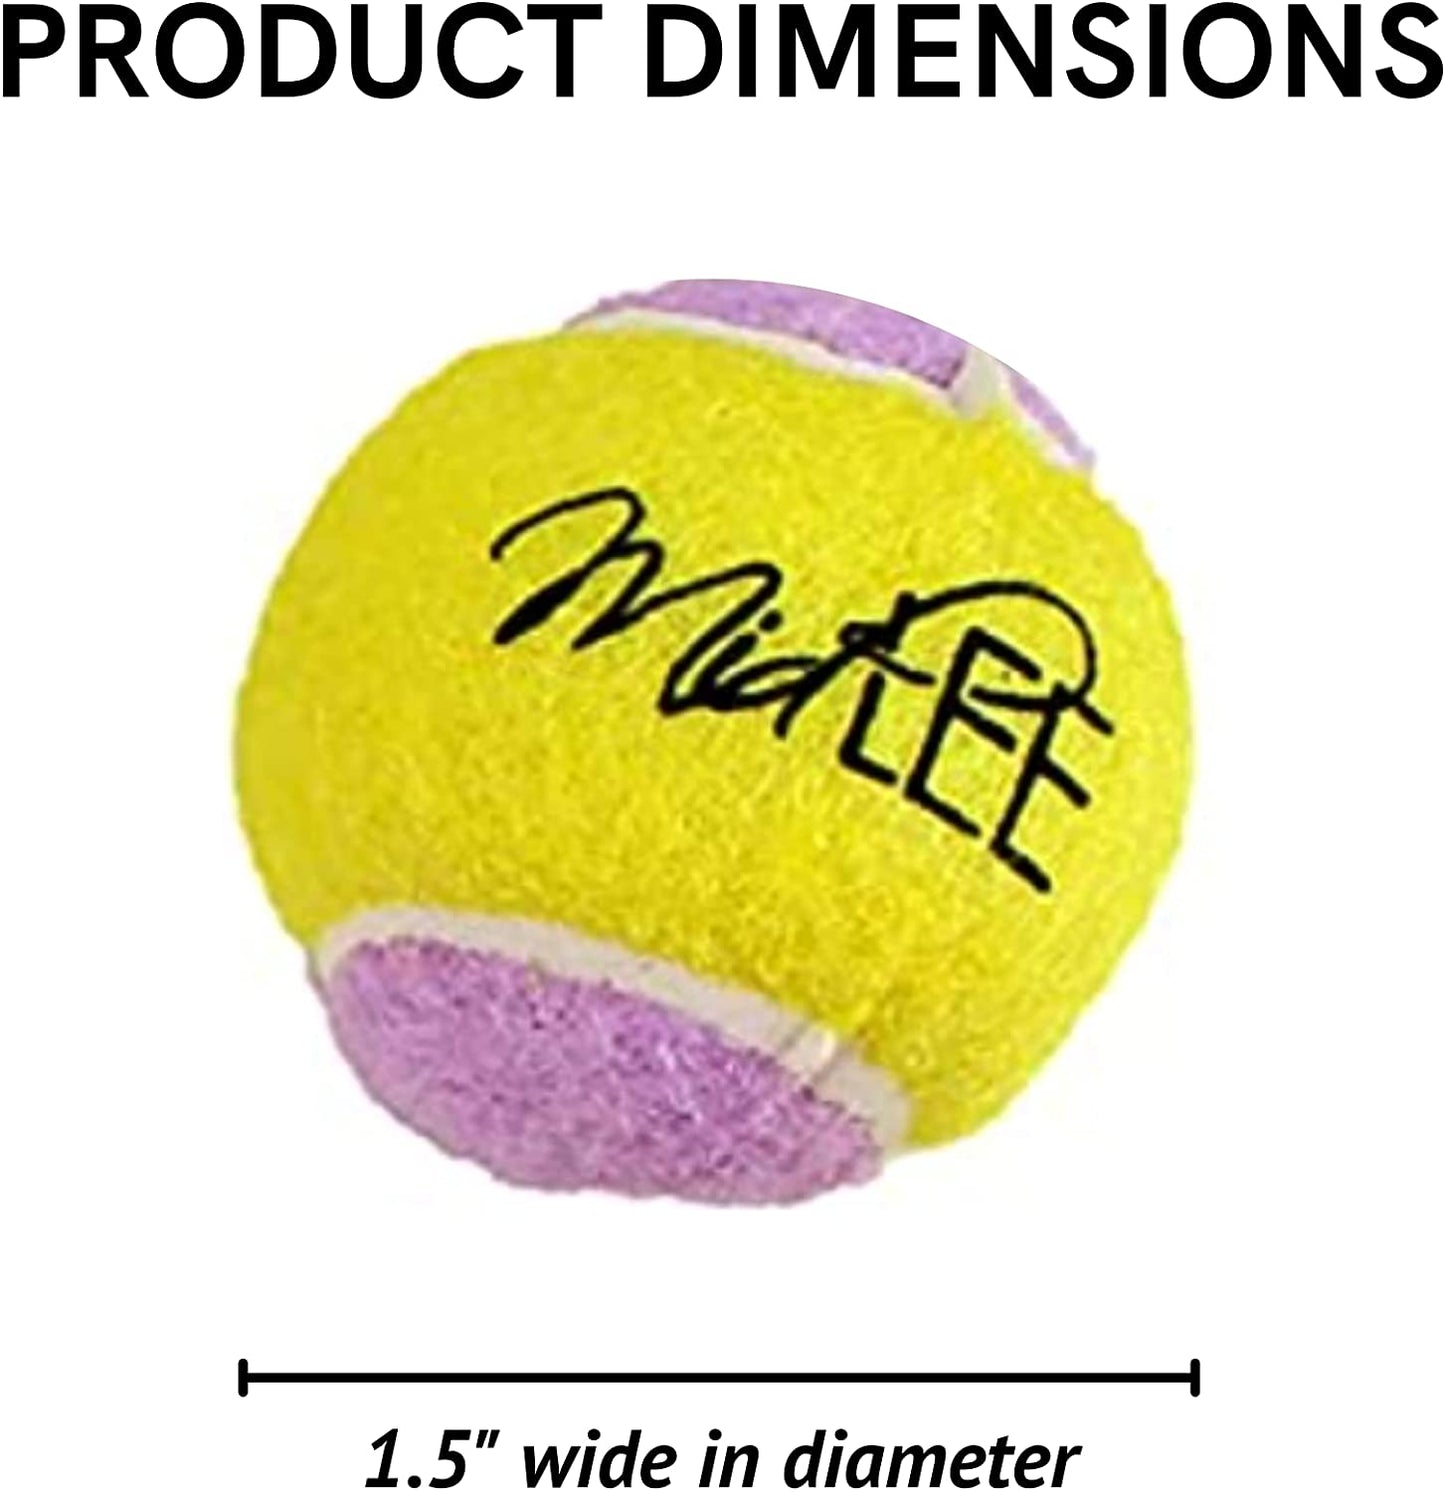 Midlee Small Dog Tennis Ball- Yellow/Lavender- Set of 12